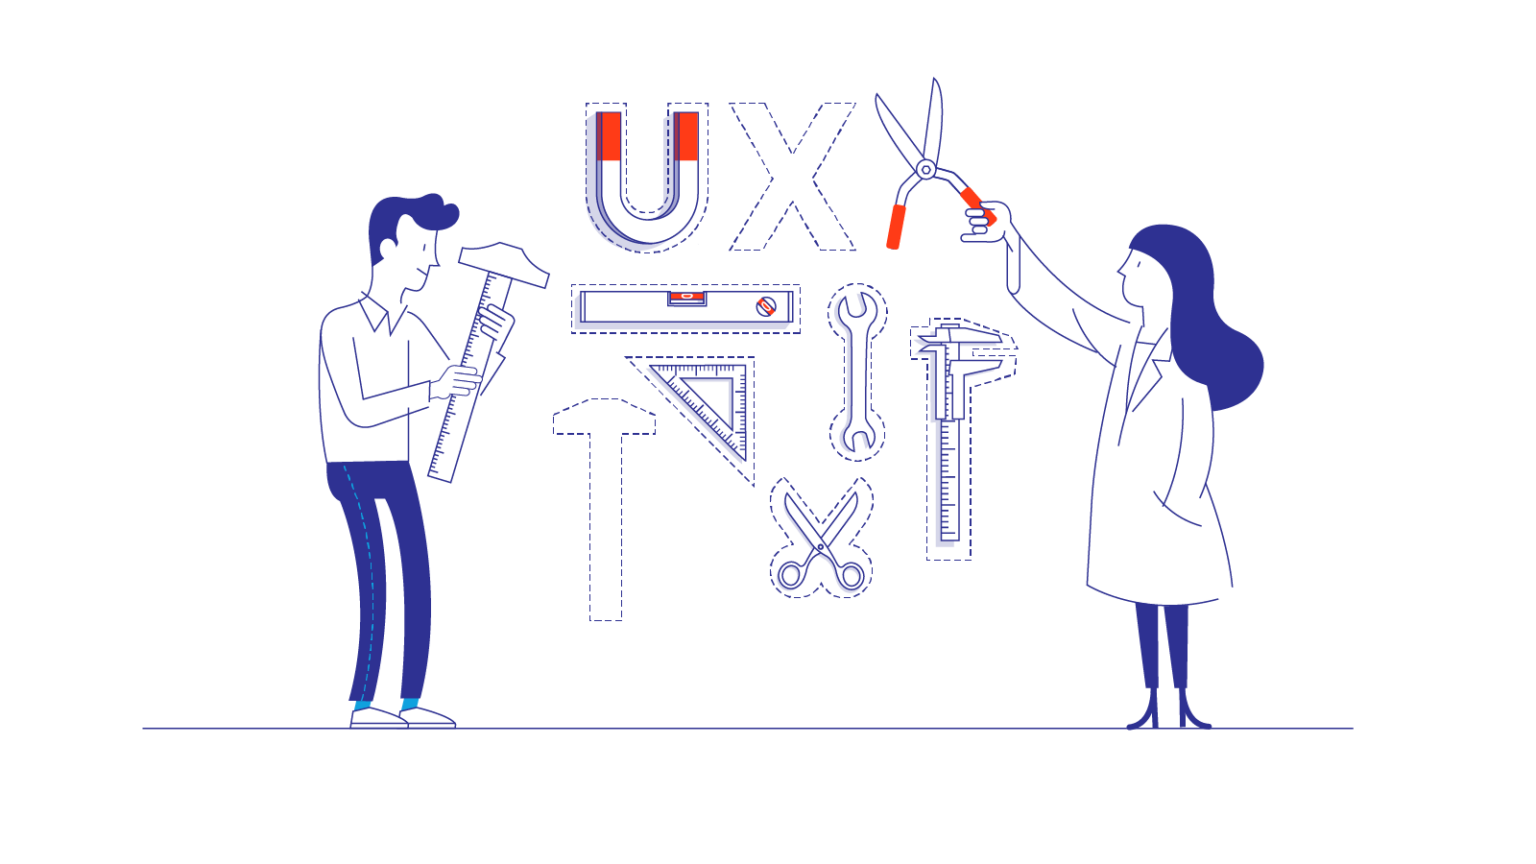 Two researchers place various physical tools near "UX"